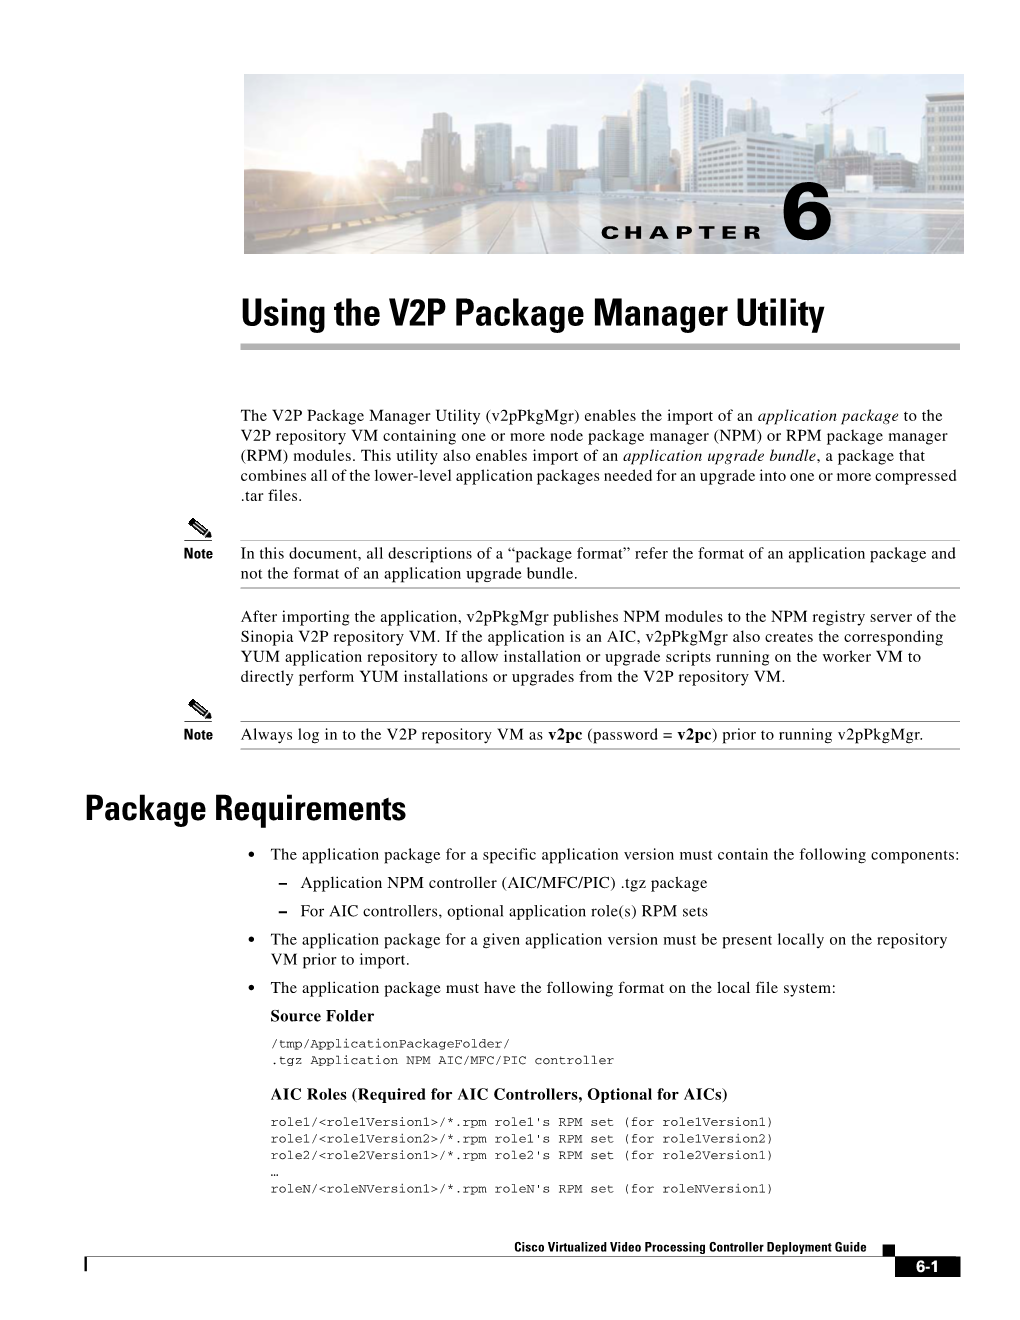 Using the V2P Package Manager Utility